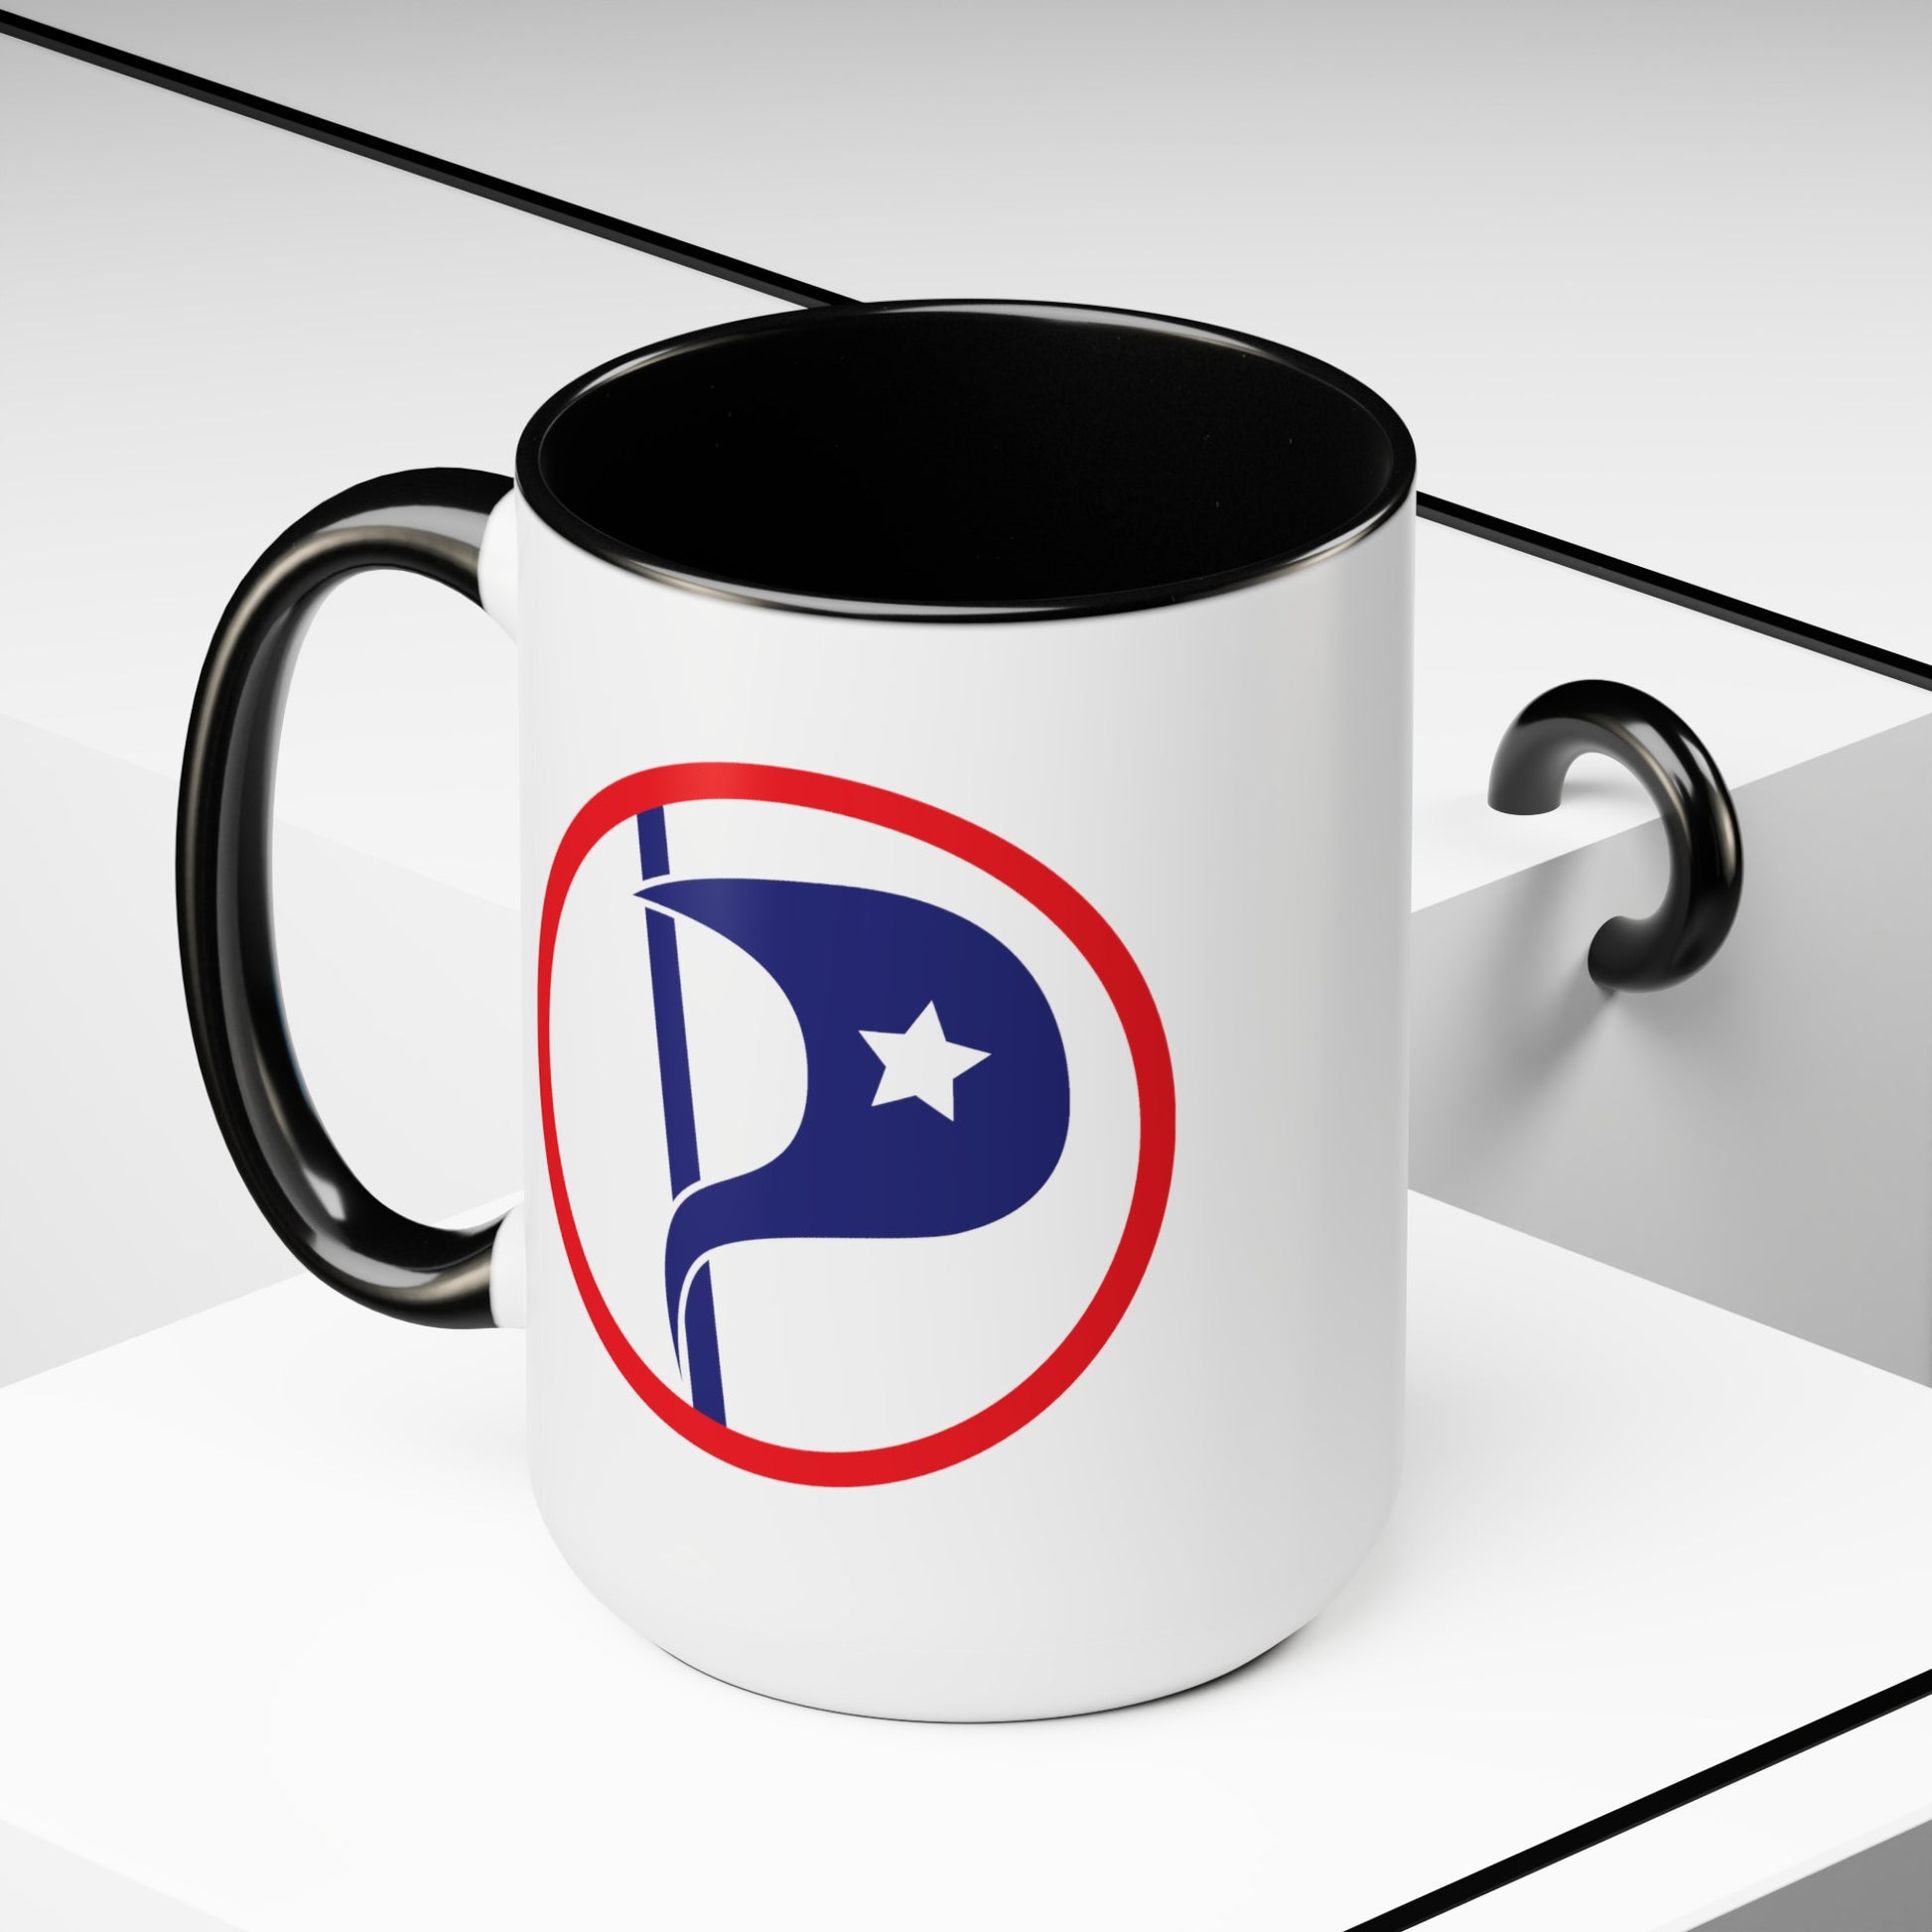 US Pirate Party Coffee Mug - Double Sided Black Accent White Ceramic 15oz by TheGlassyLass.com